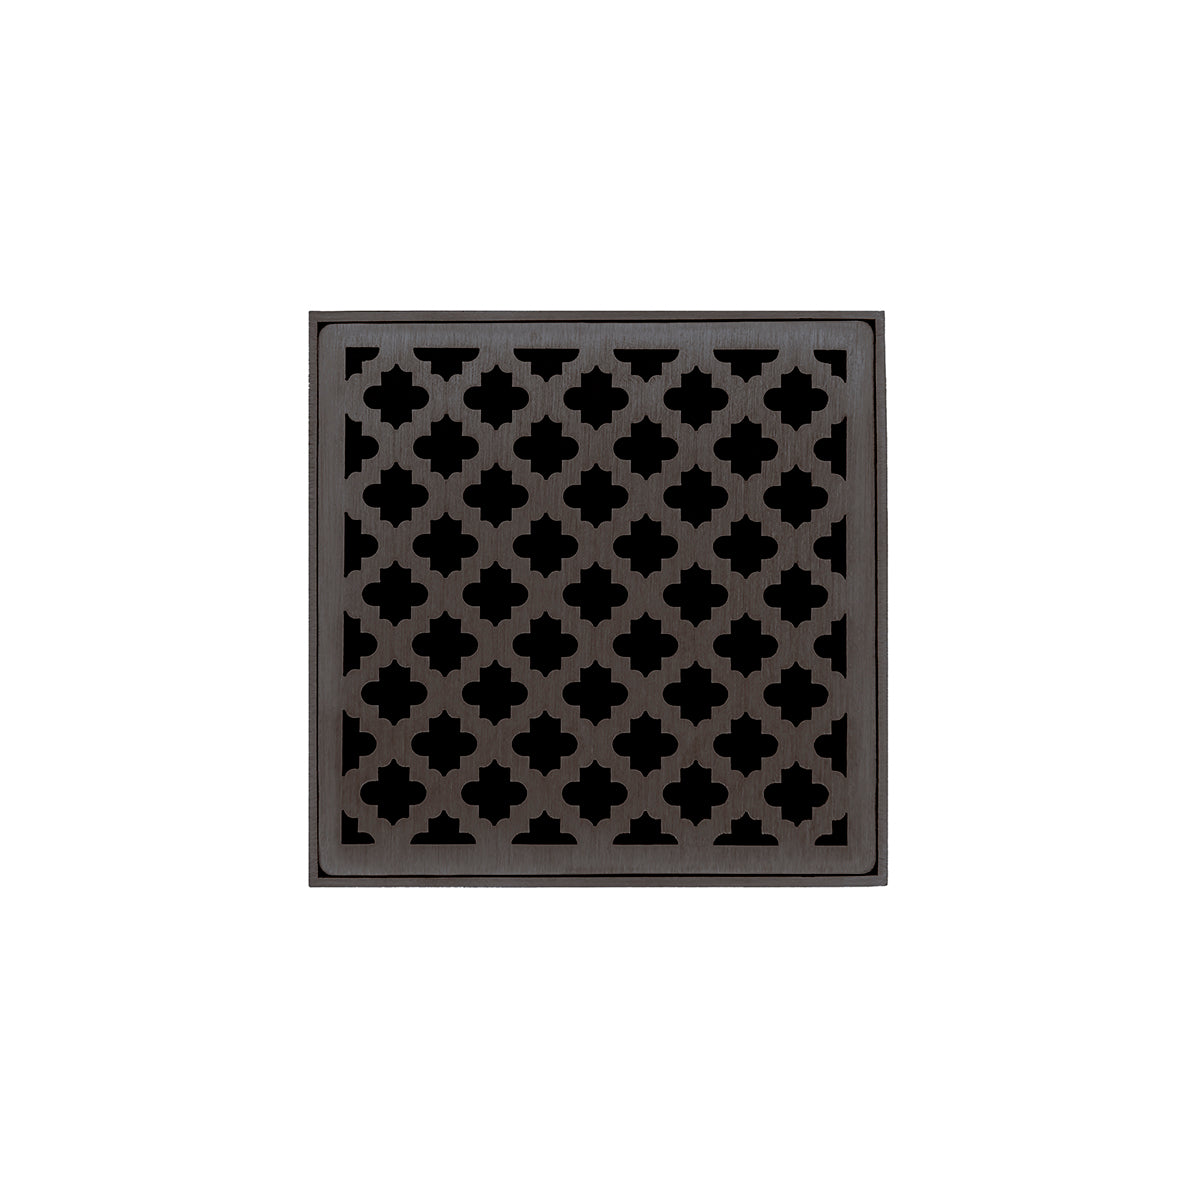 Infinity Drain 4" x 4" MDB 4 Premium Center Drain Kit with Moor Pattern Decorative Plate with PVC Bonded Flange Drain Body, 2", 3" and 4" Outlet